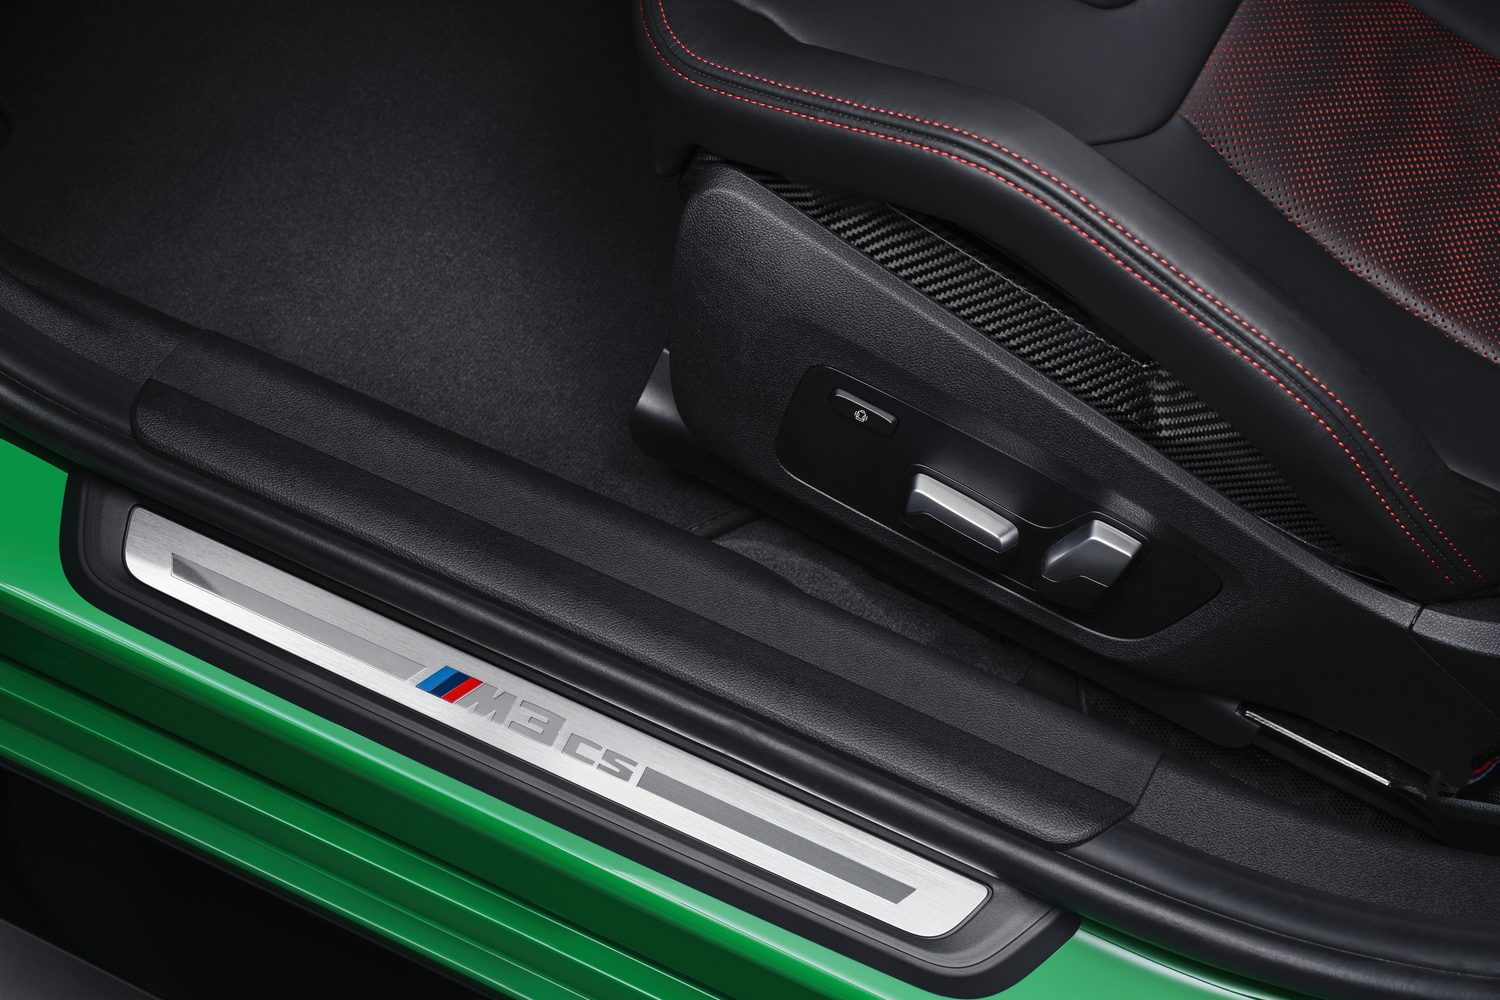 More power, less weight for BMW M3 CS